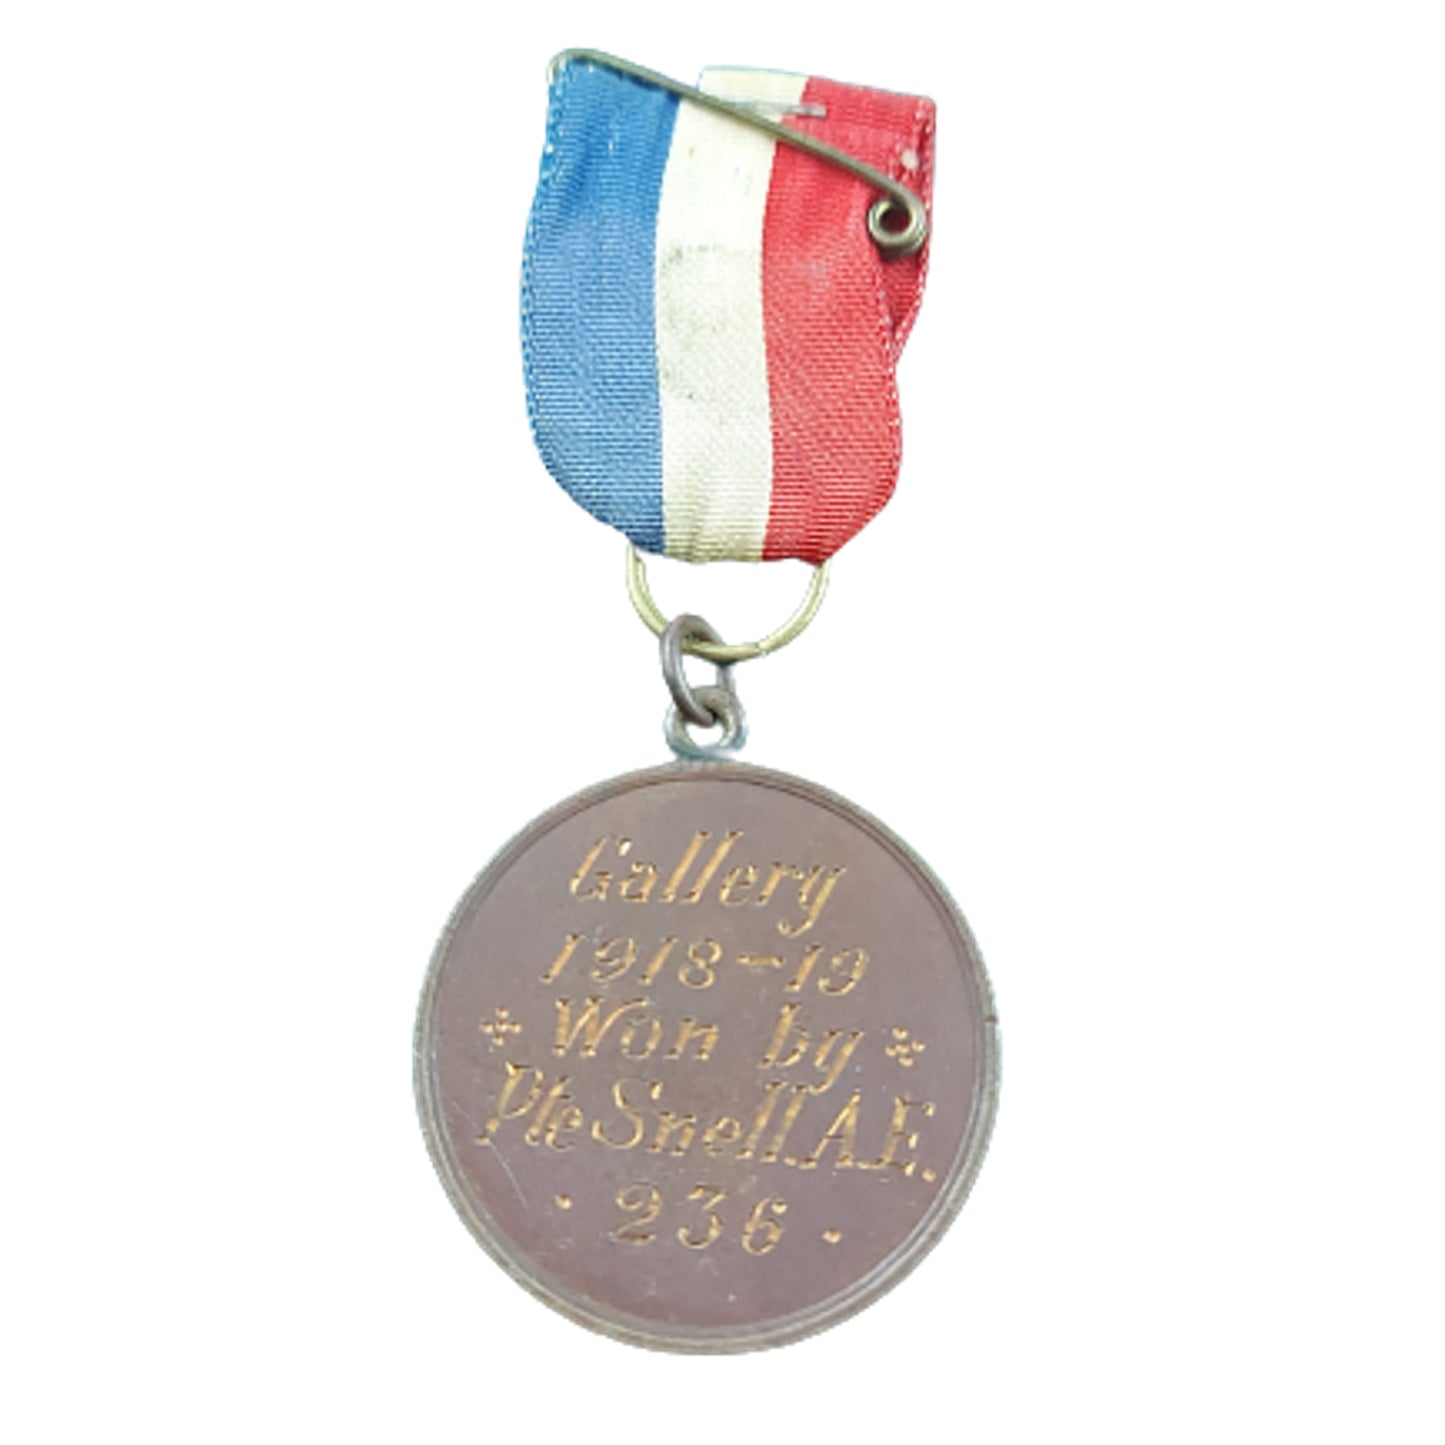 Named WW1 103rd Calgary Rifles Association Rifle Competition Medal